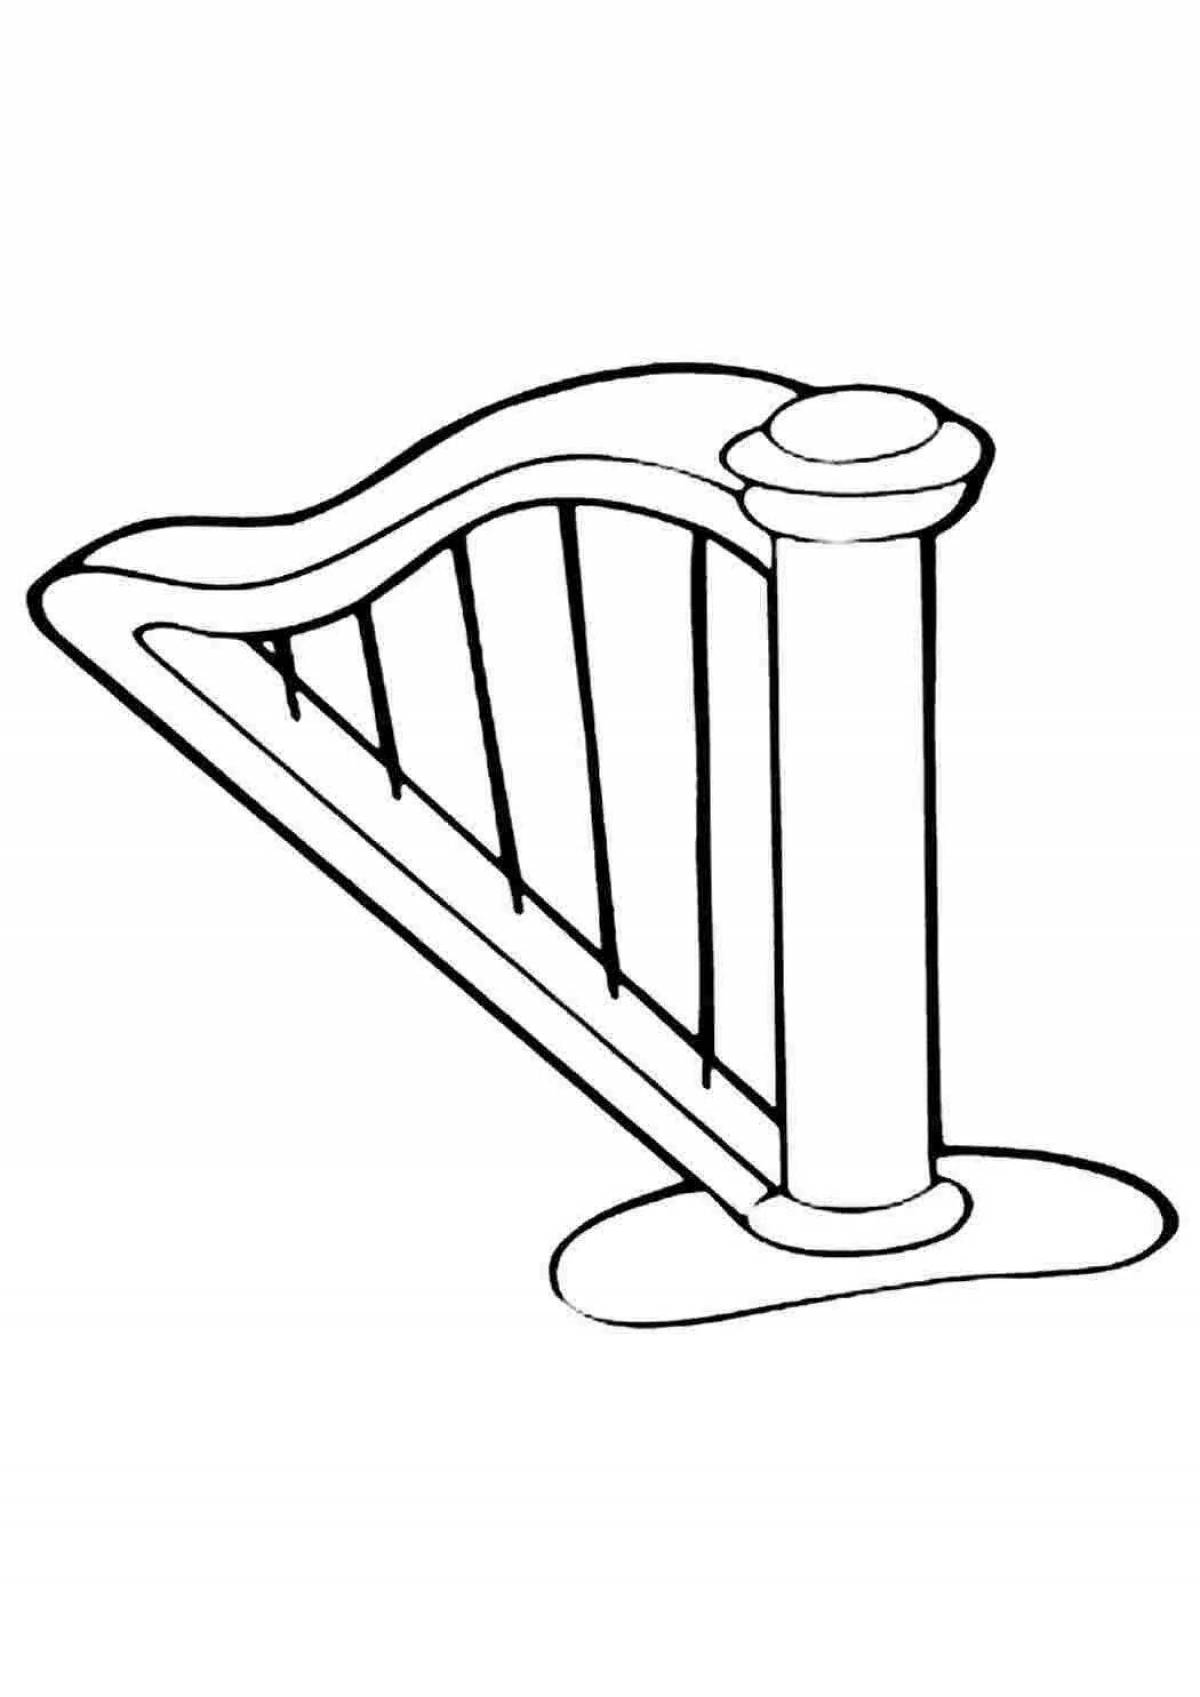 Fancy harp coloring page